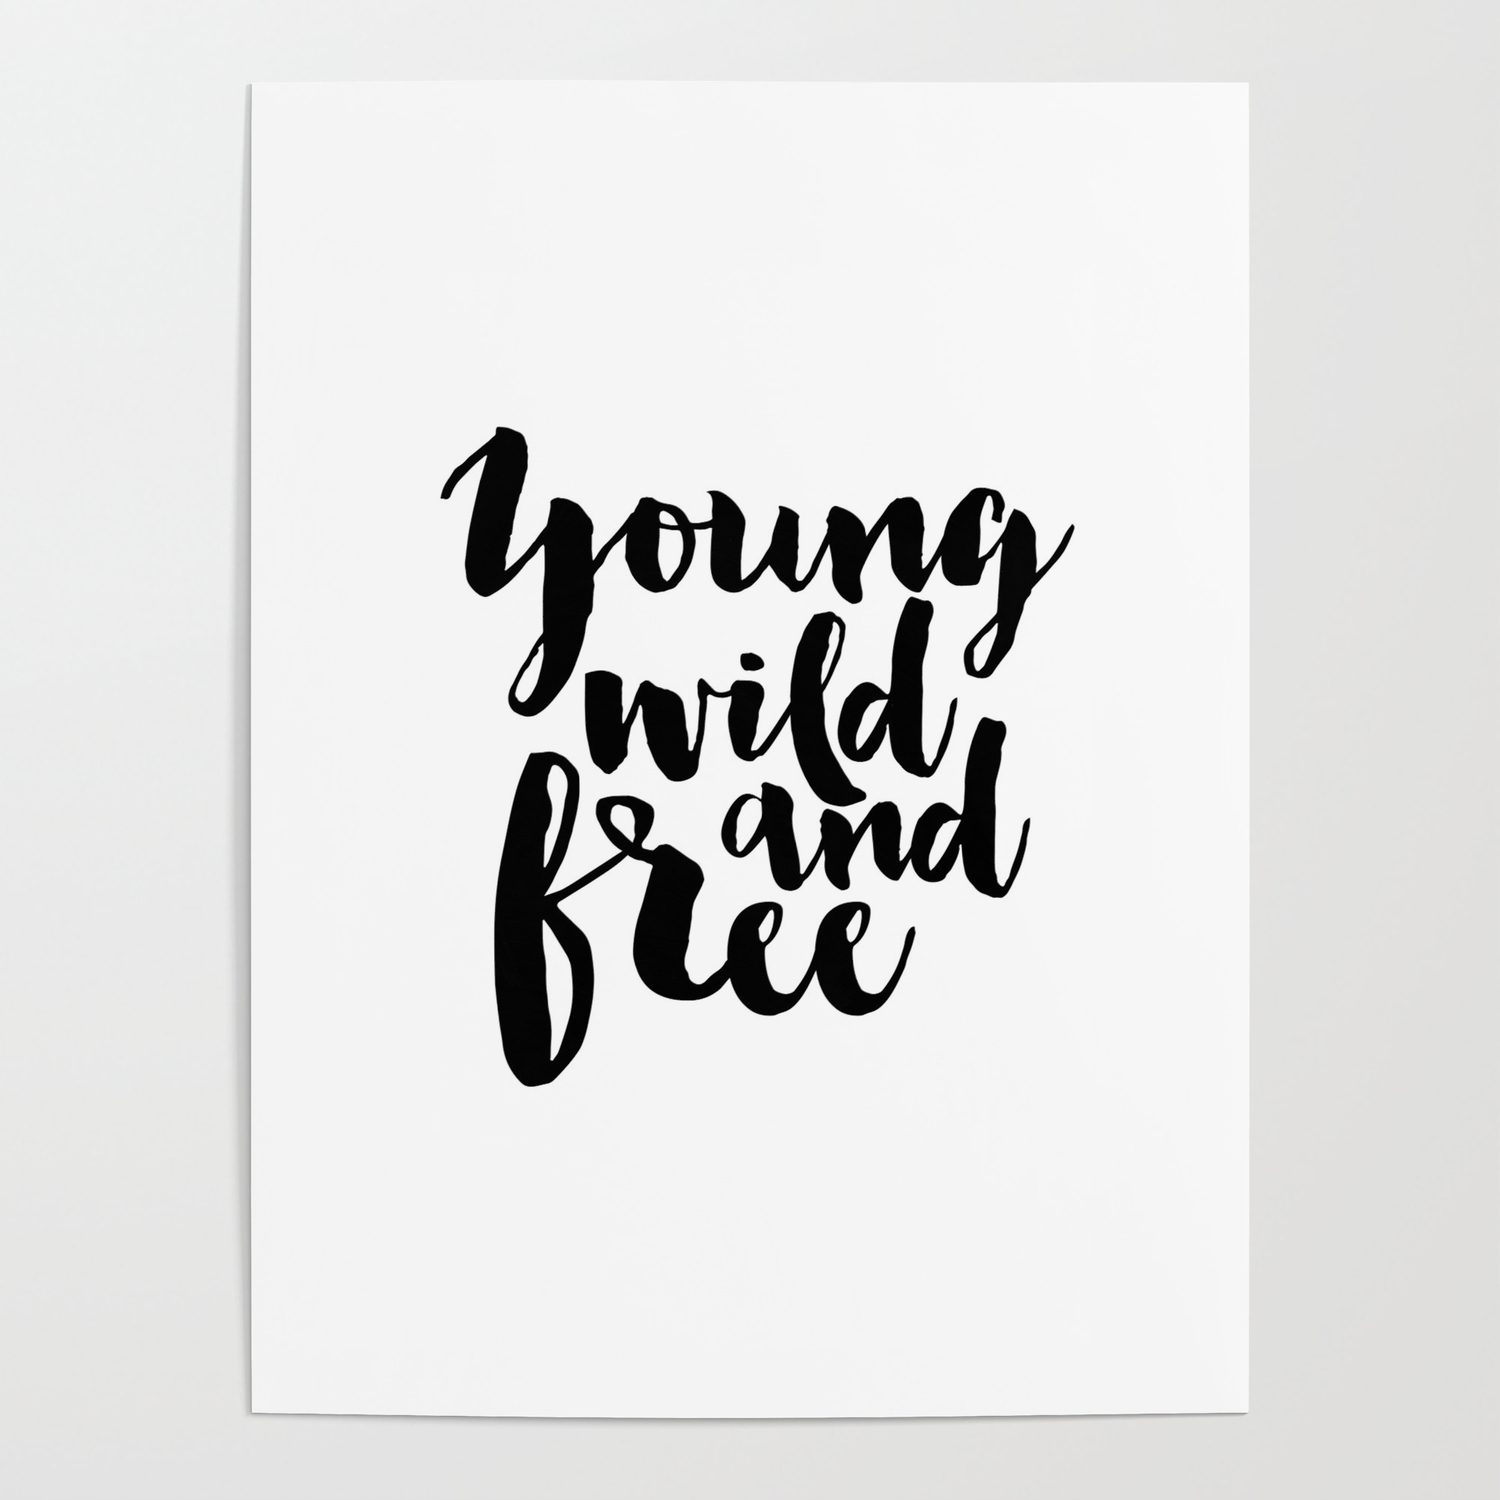 Printable Art Nursery Poster Wild And Free Arrow Wall Decor Arrow Print Typography Poster Inspiratio Poster By Typohouseart Society6